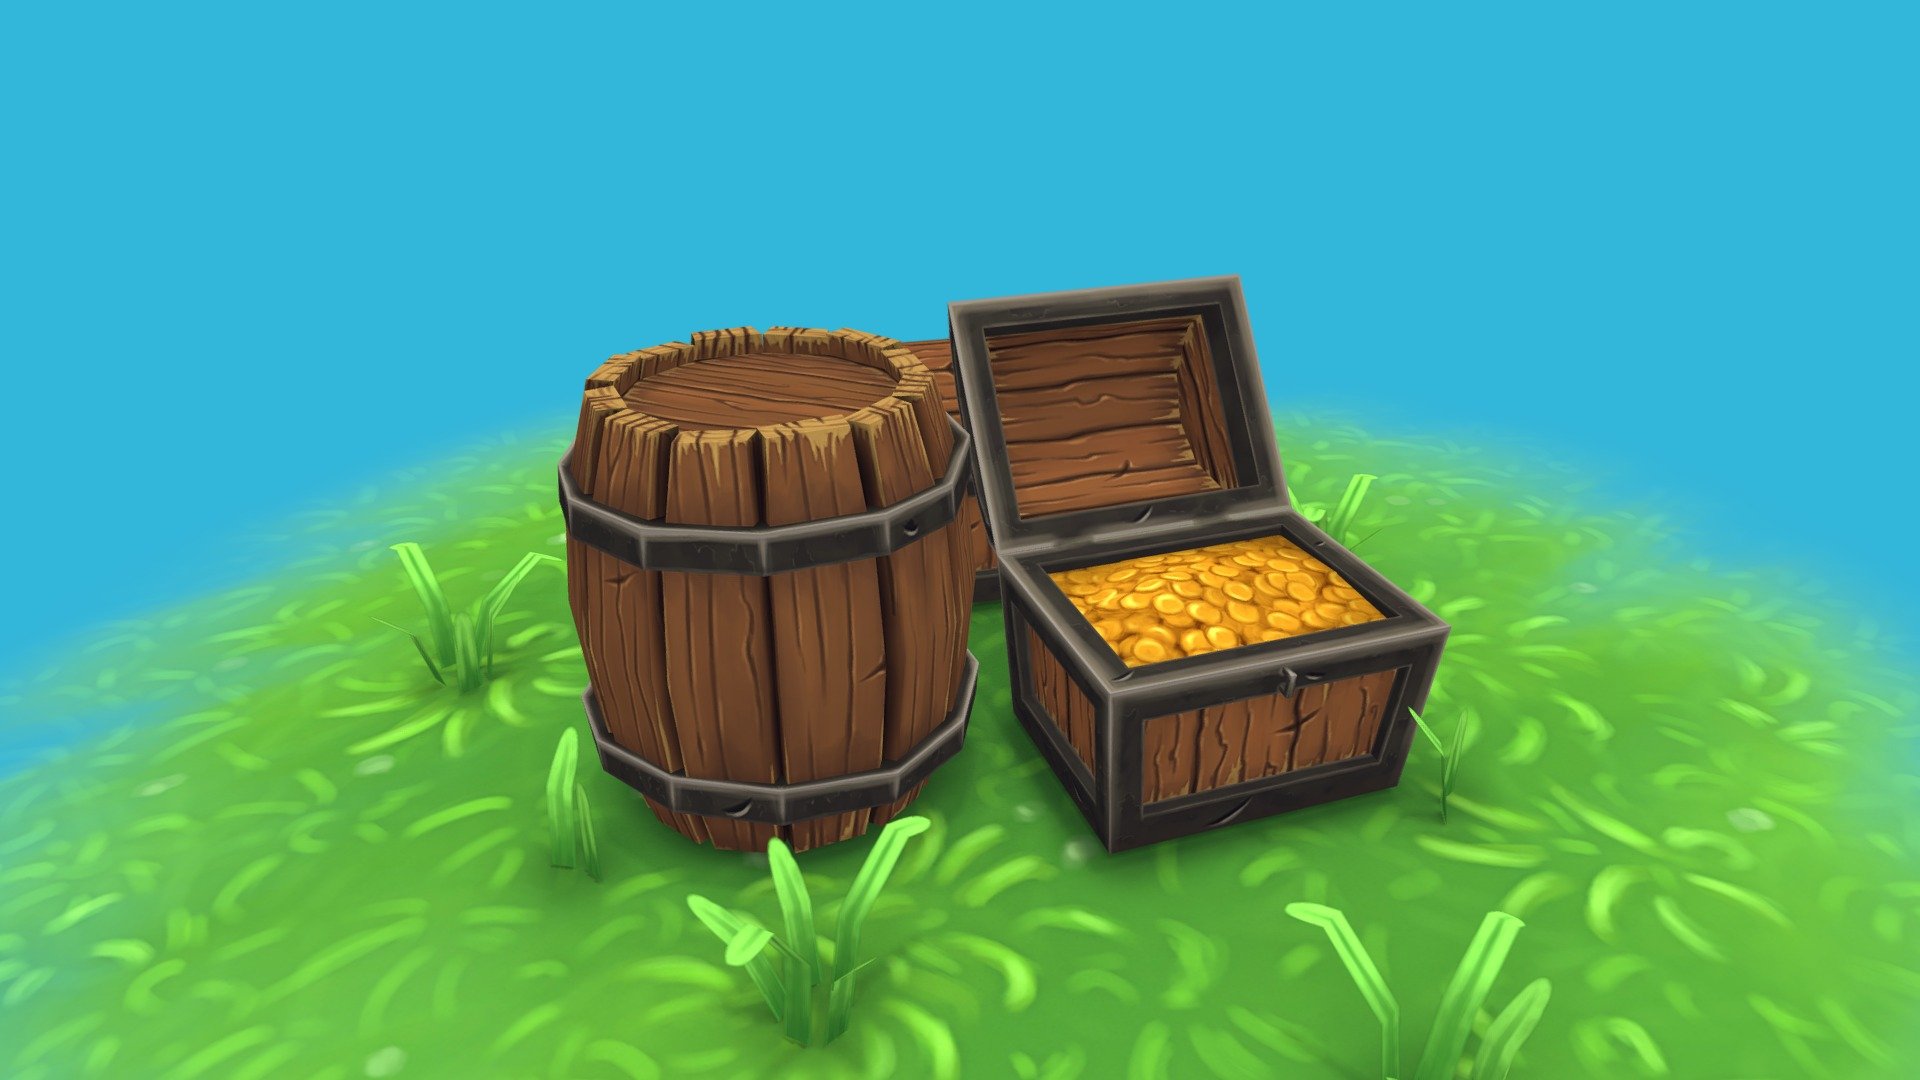 Low poly barrel and treasure chest (modular).

Simple lighting. Switch to shadeless mode for pure textures 3d model